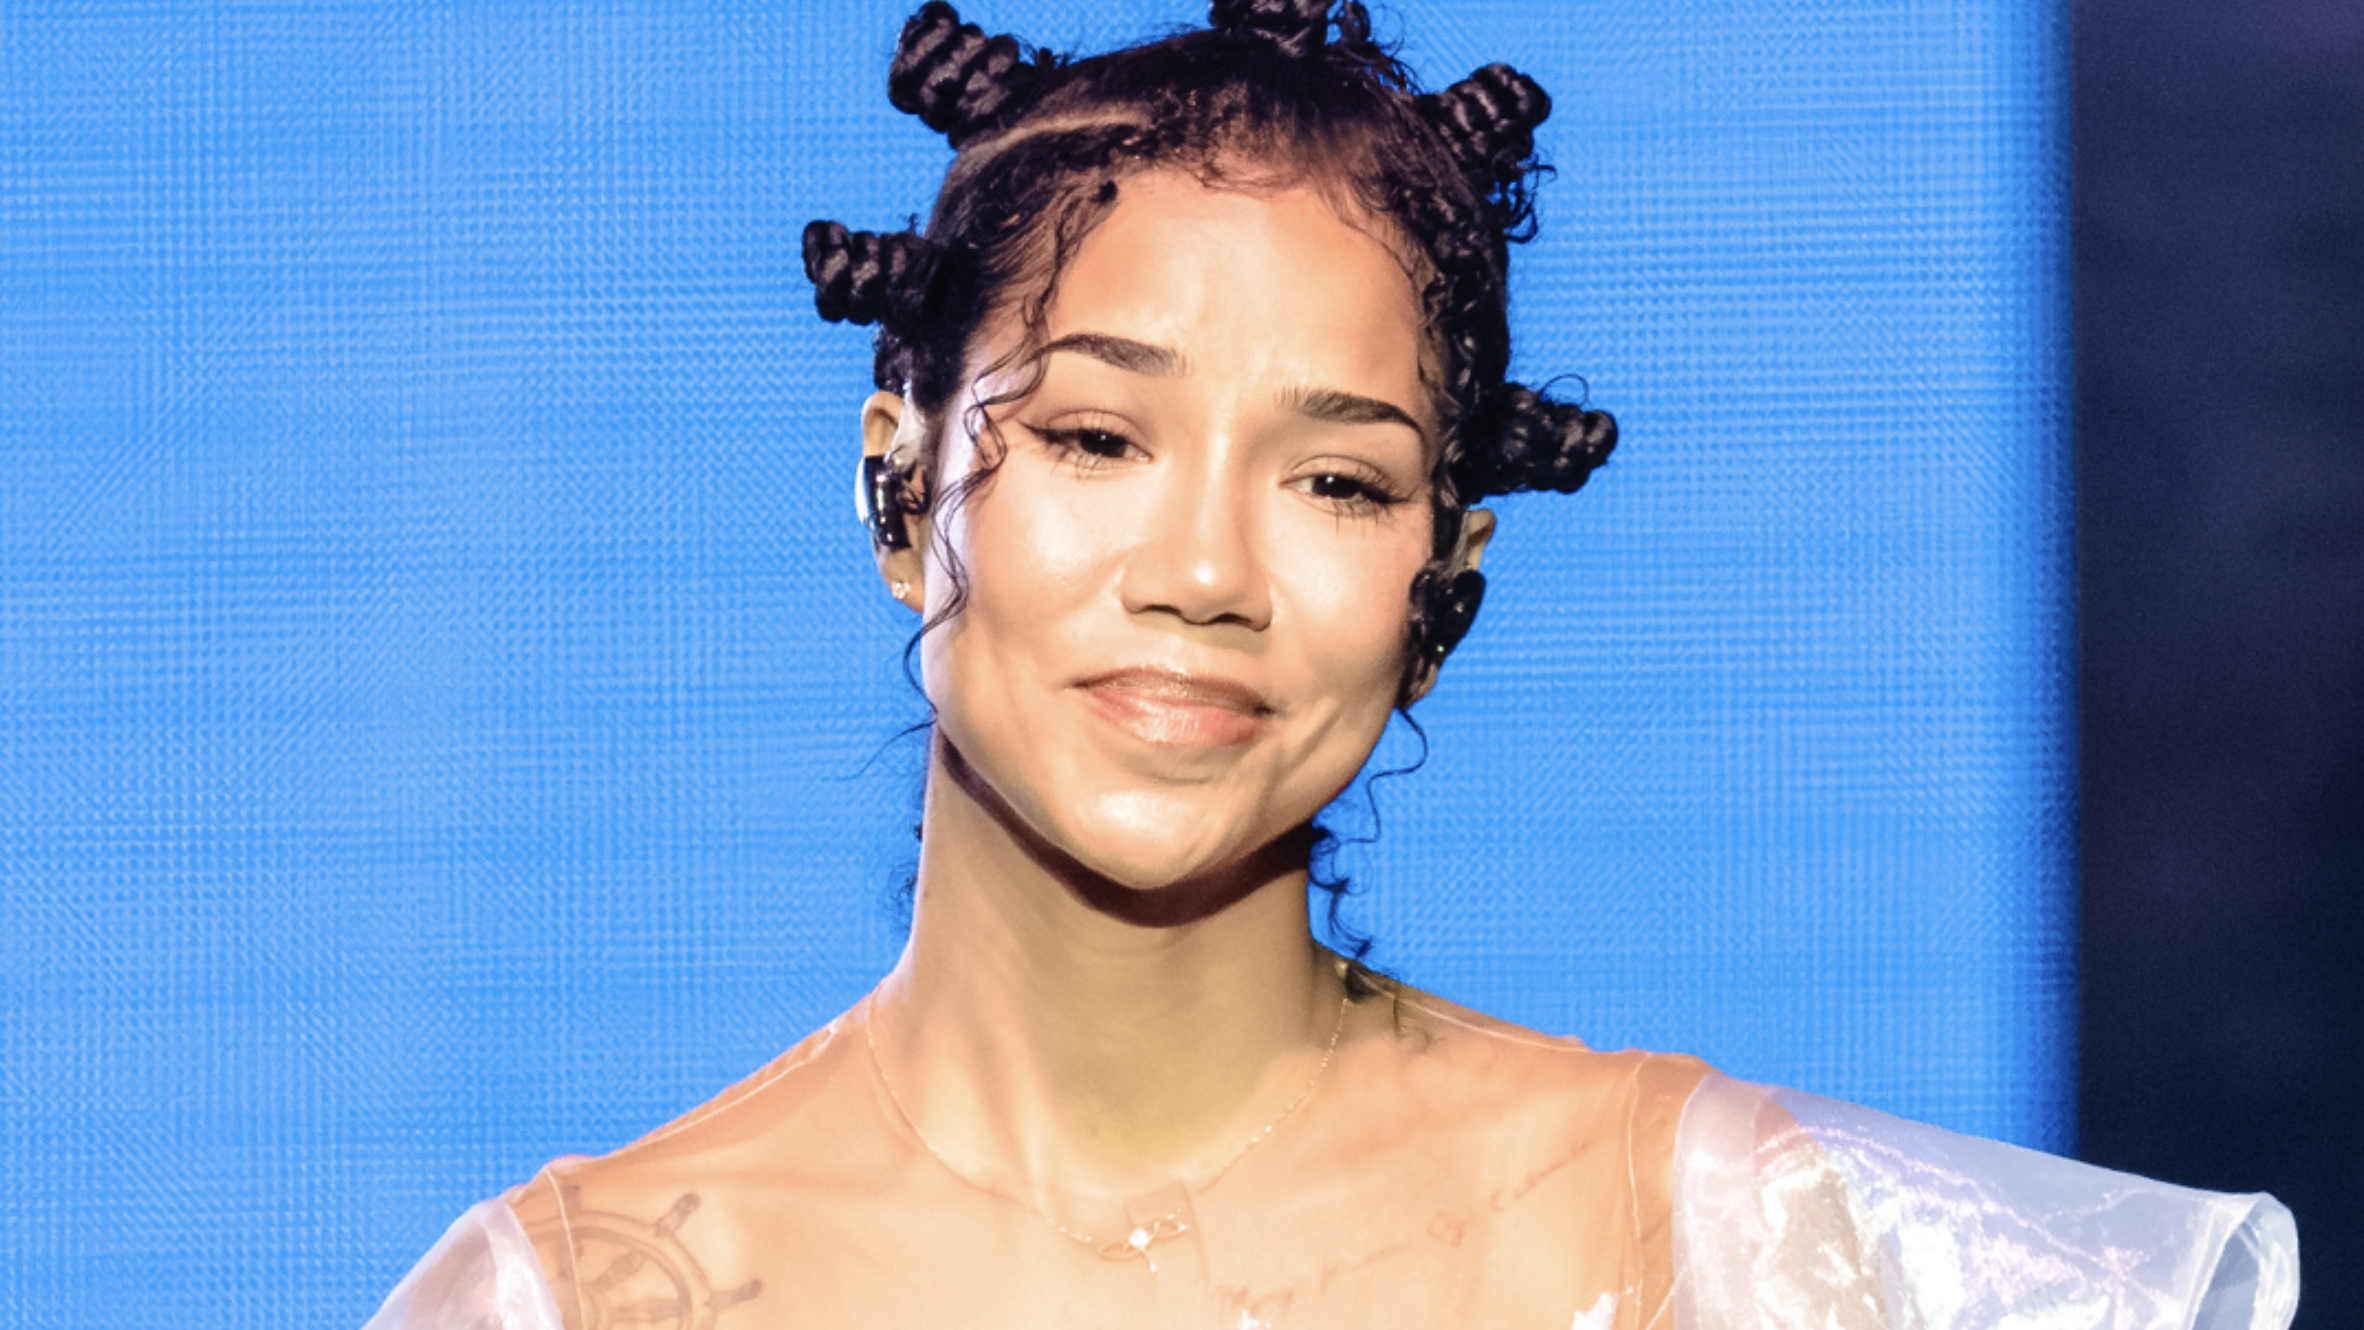 Jhene Aiko Faces Legal Action After Being Accused of Causing Injury In Car Accident